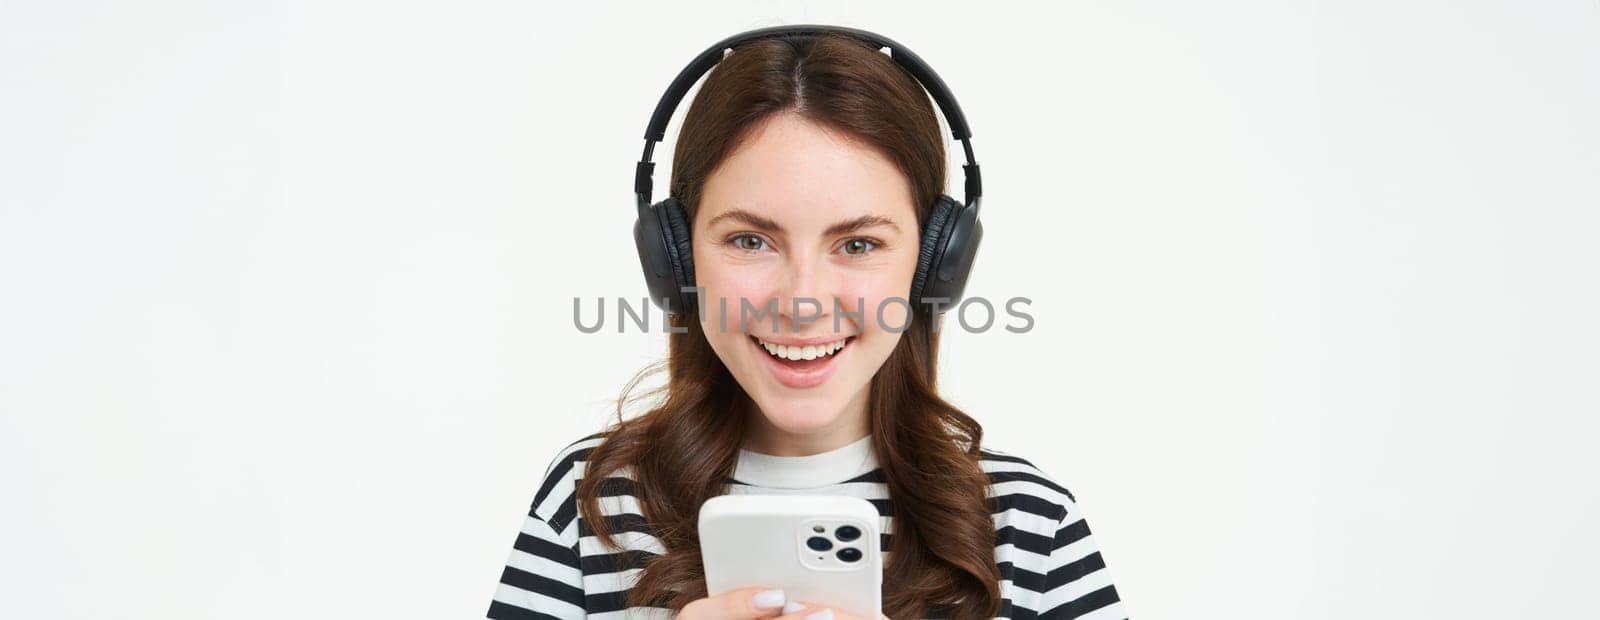 Image of young woman in headphones, using smartphone and laughing, watching video on mobile phone, listens to music on streaming service app, white background.